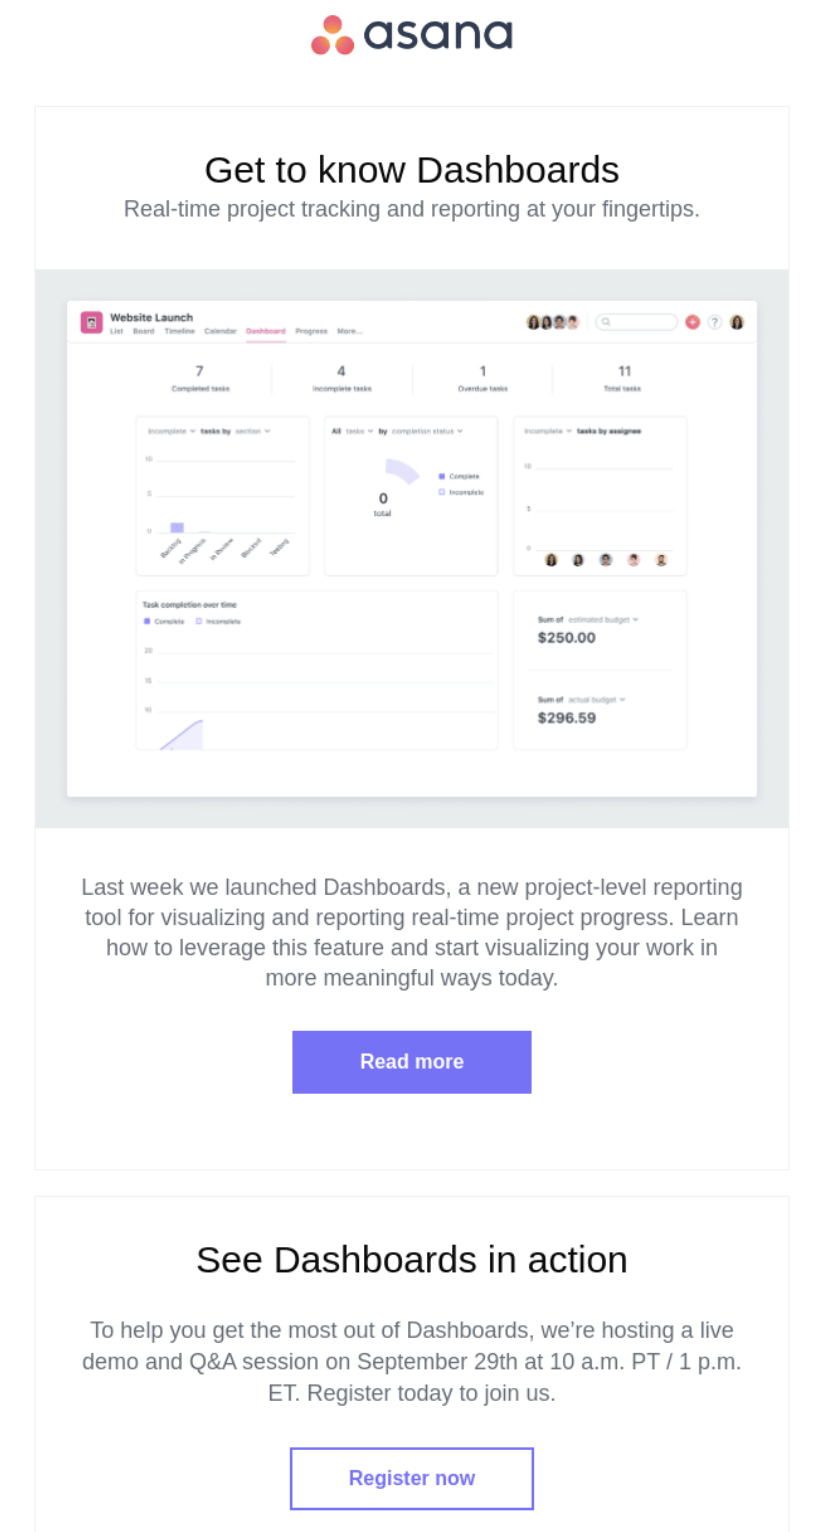 How to Create a Product Launch Email Outlines   Templates